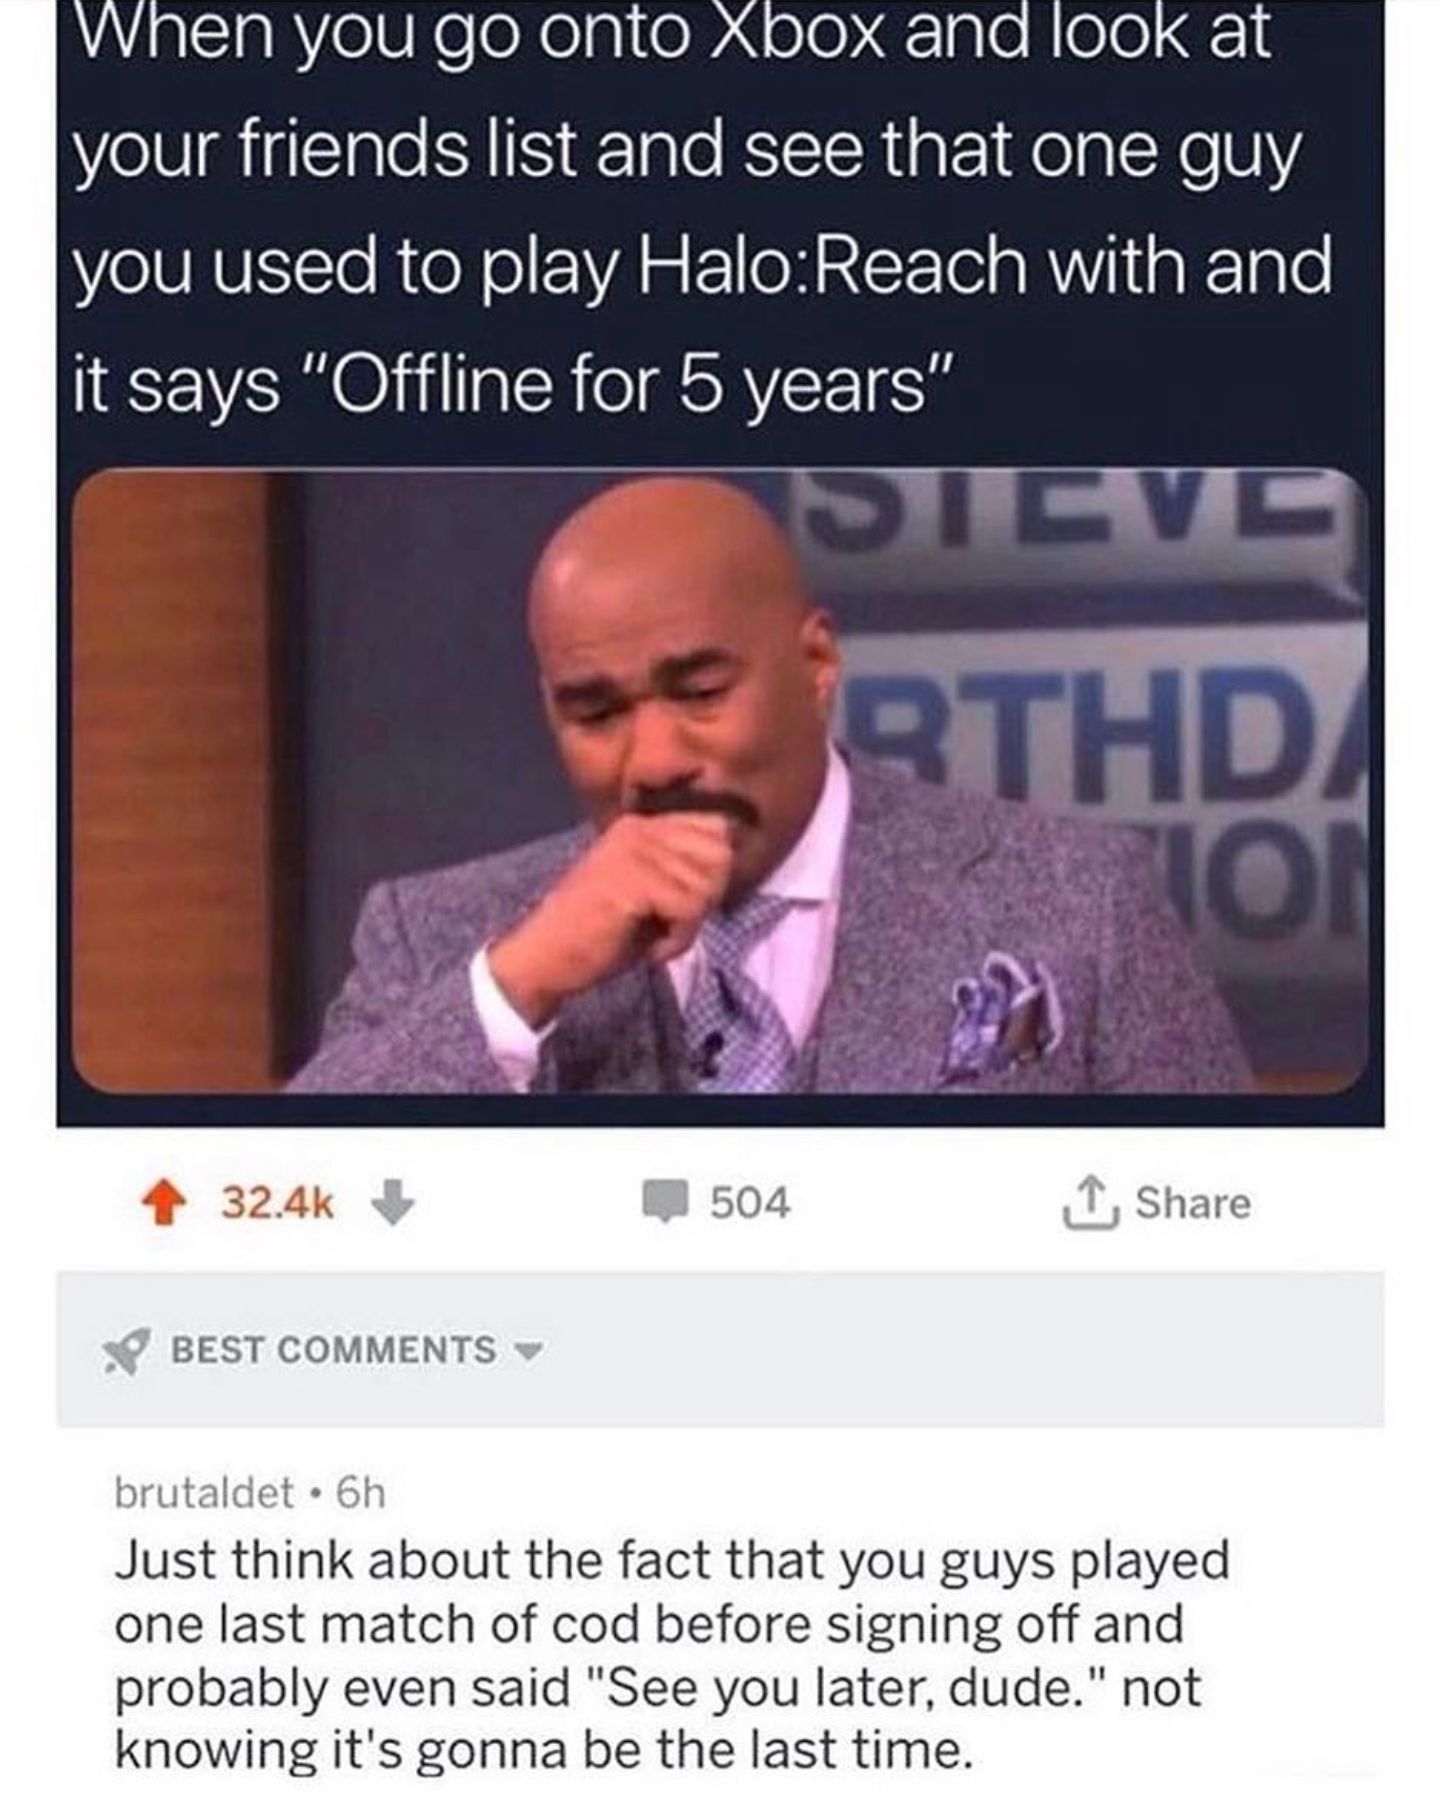 "Offline for 5 years"